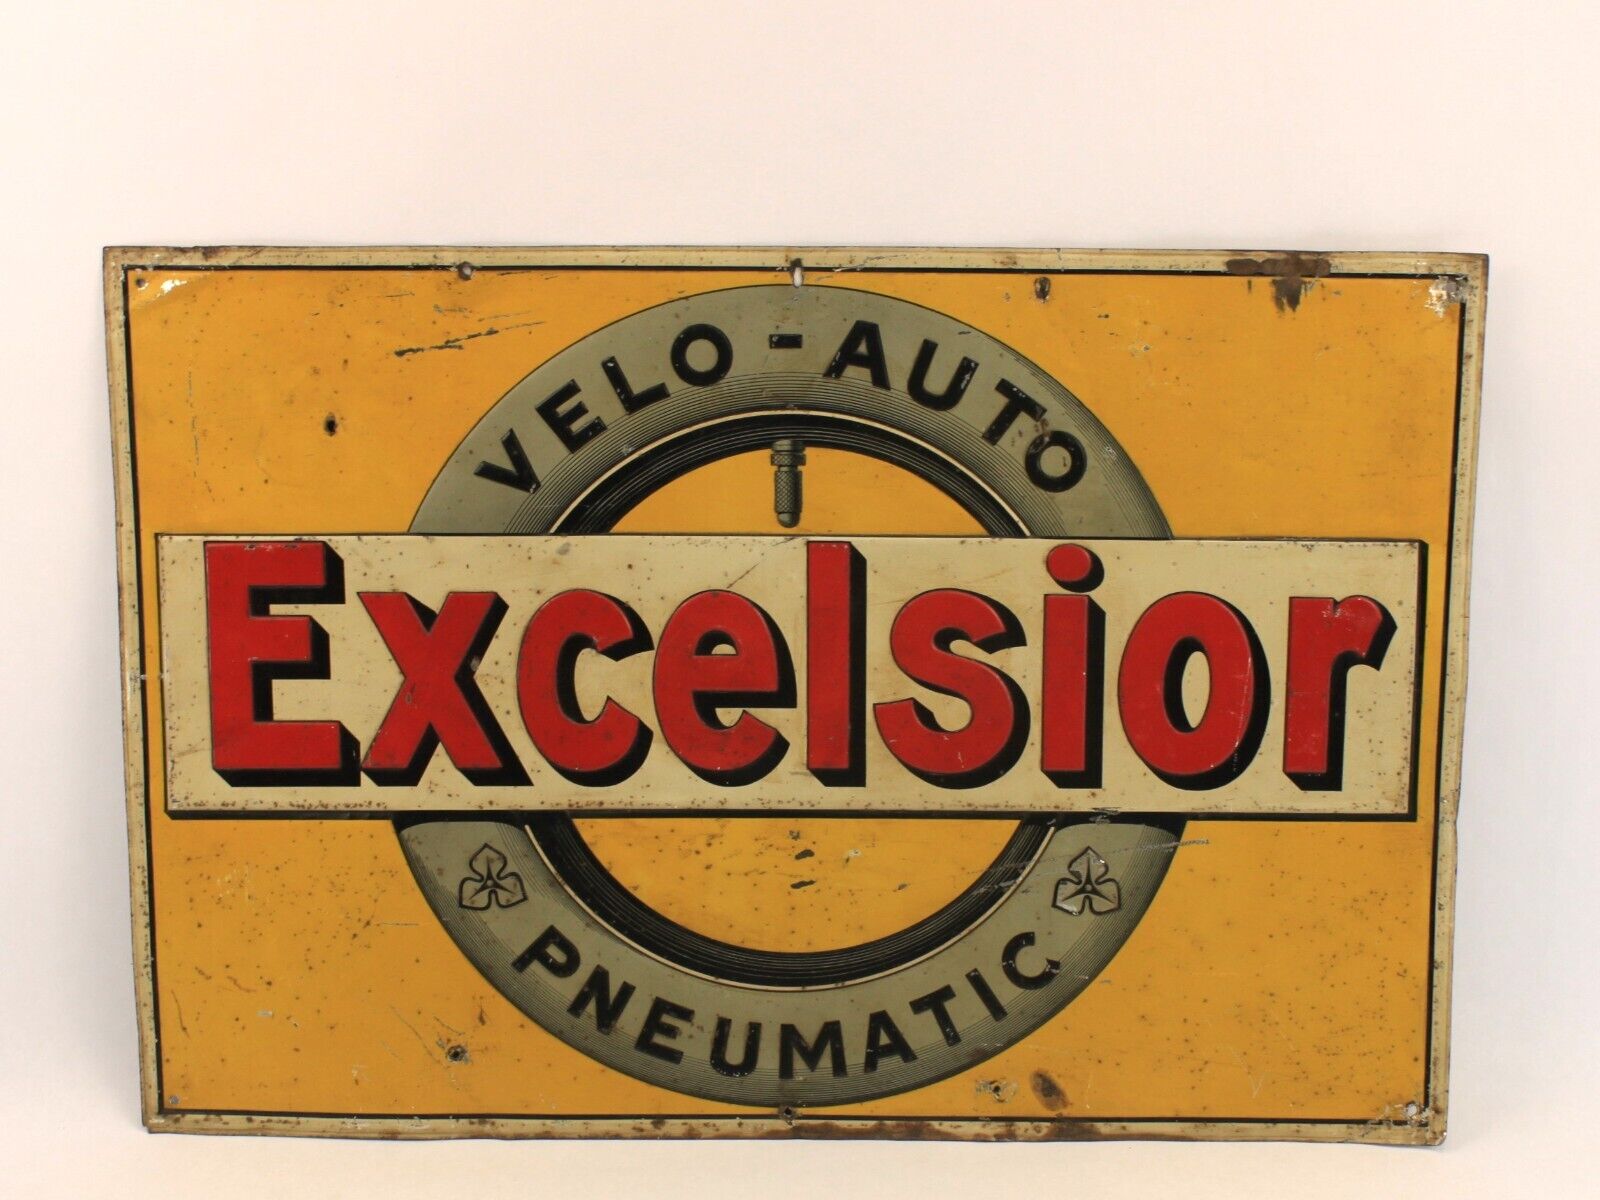 Excelsior Velo Auto Pneumatic Advertising Sign